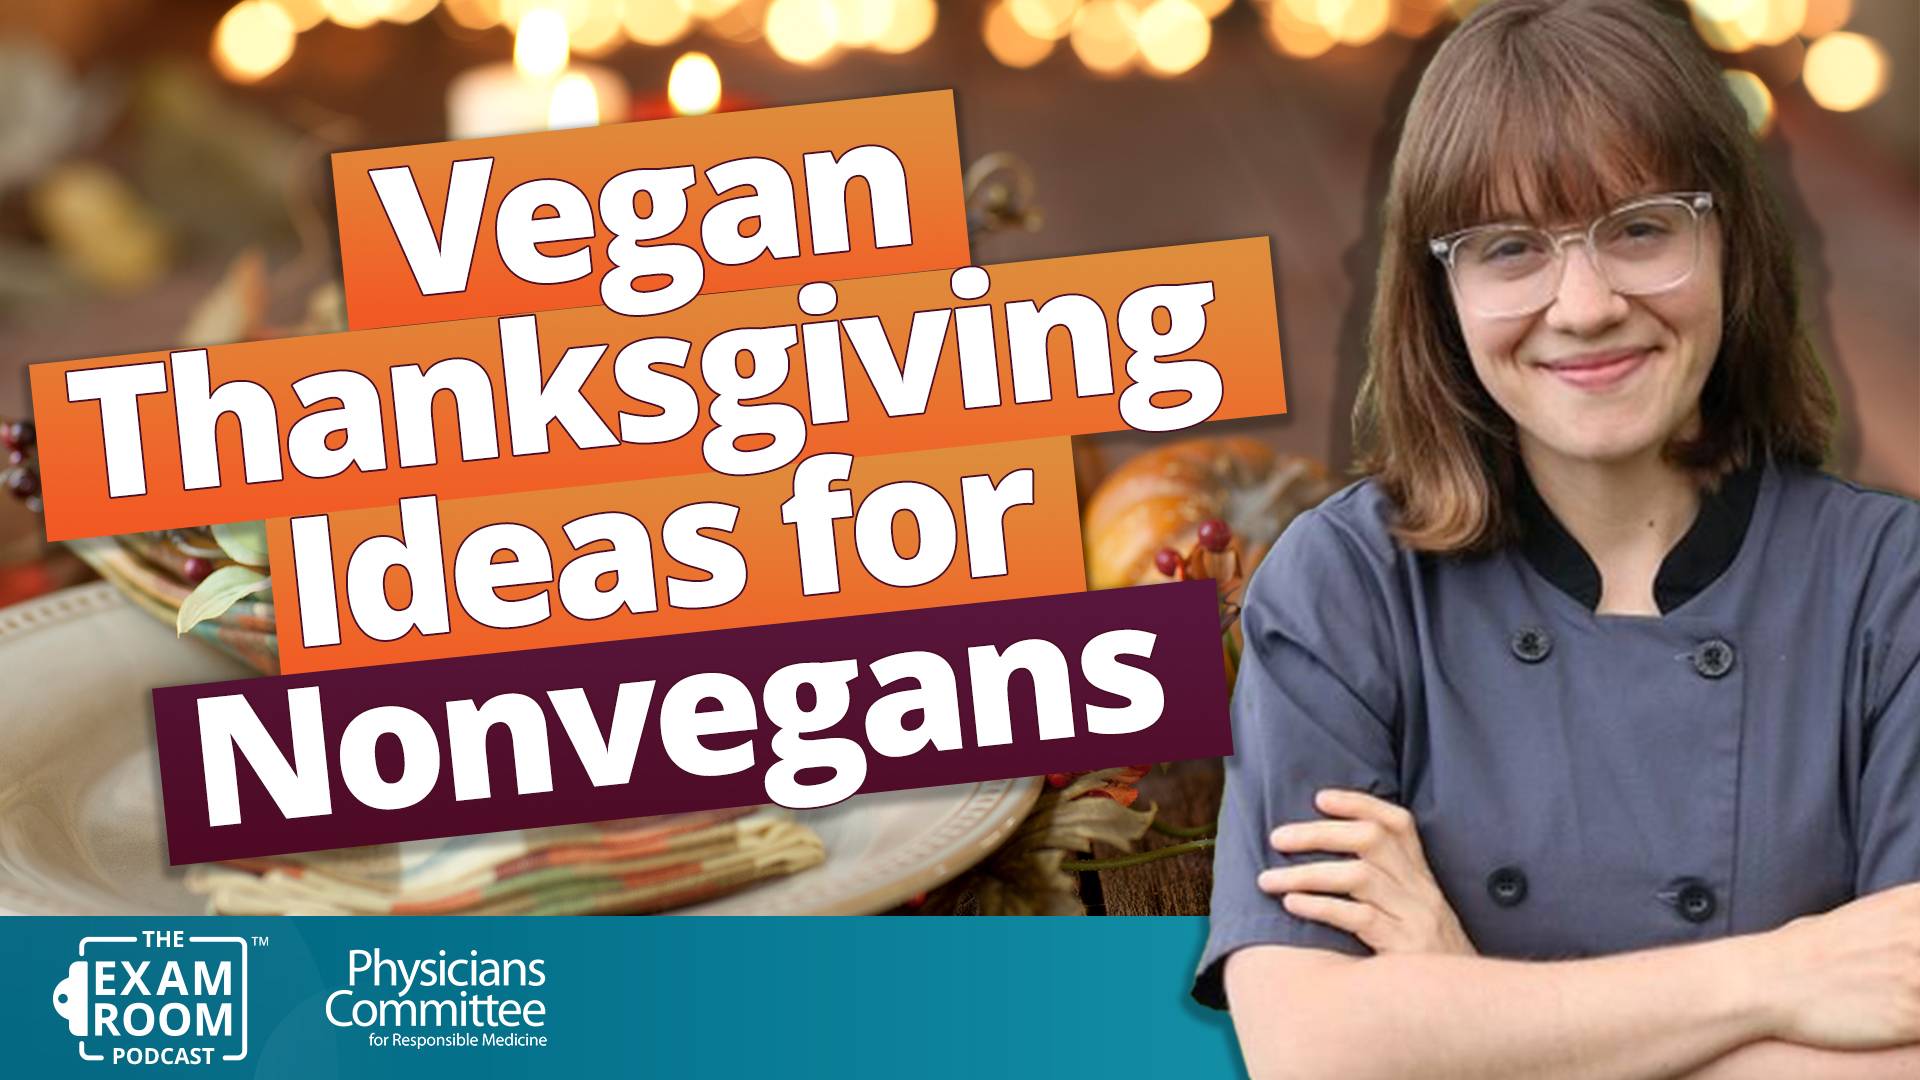 It's Thanksgiving. You're vegan. Your guests are not. What do you serve?